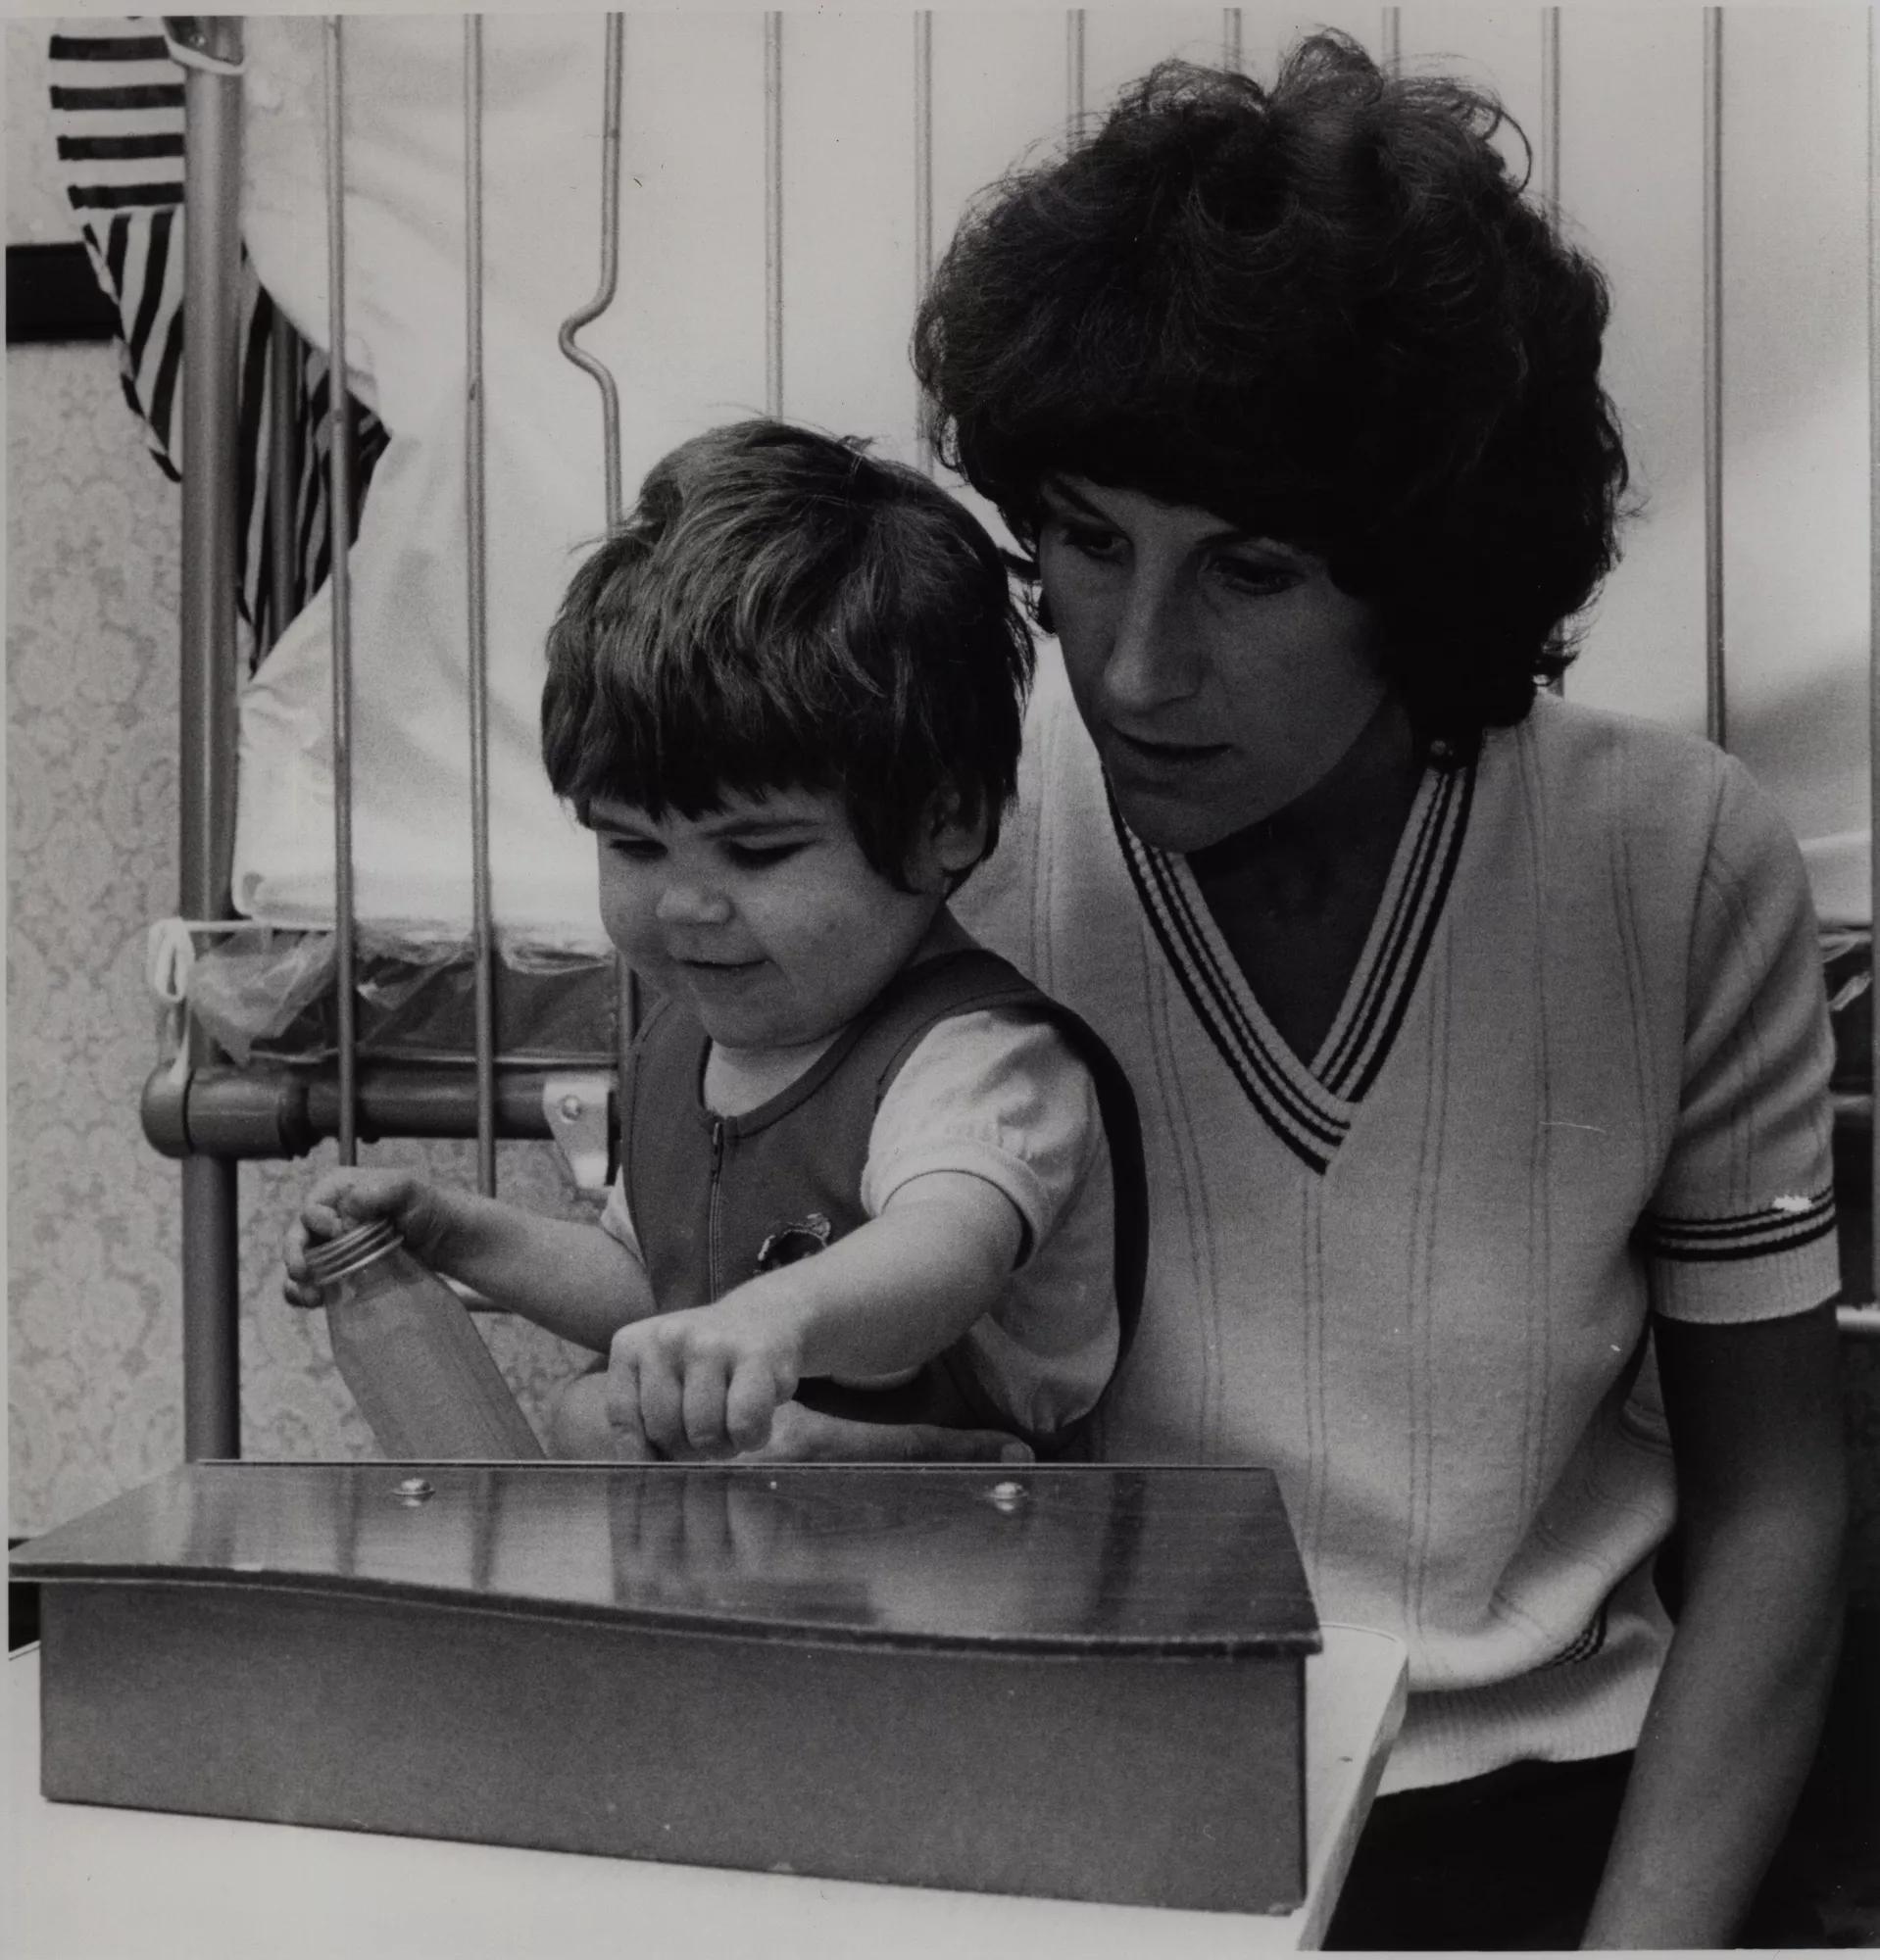 Anthony and his mother, Shirley Nolan